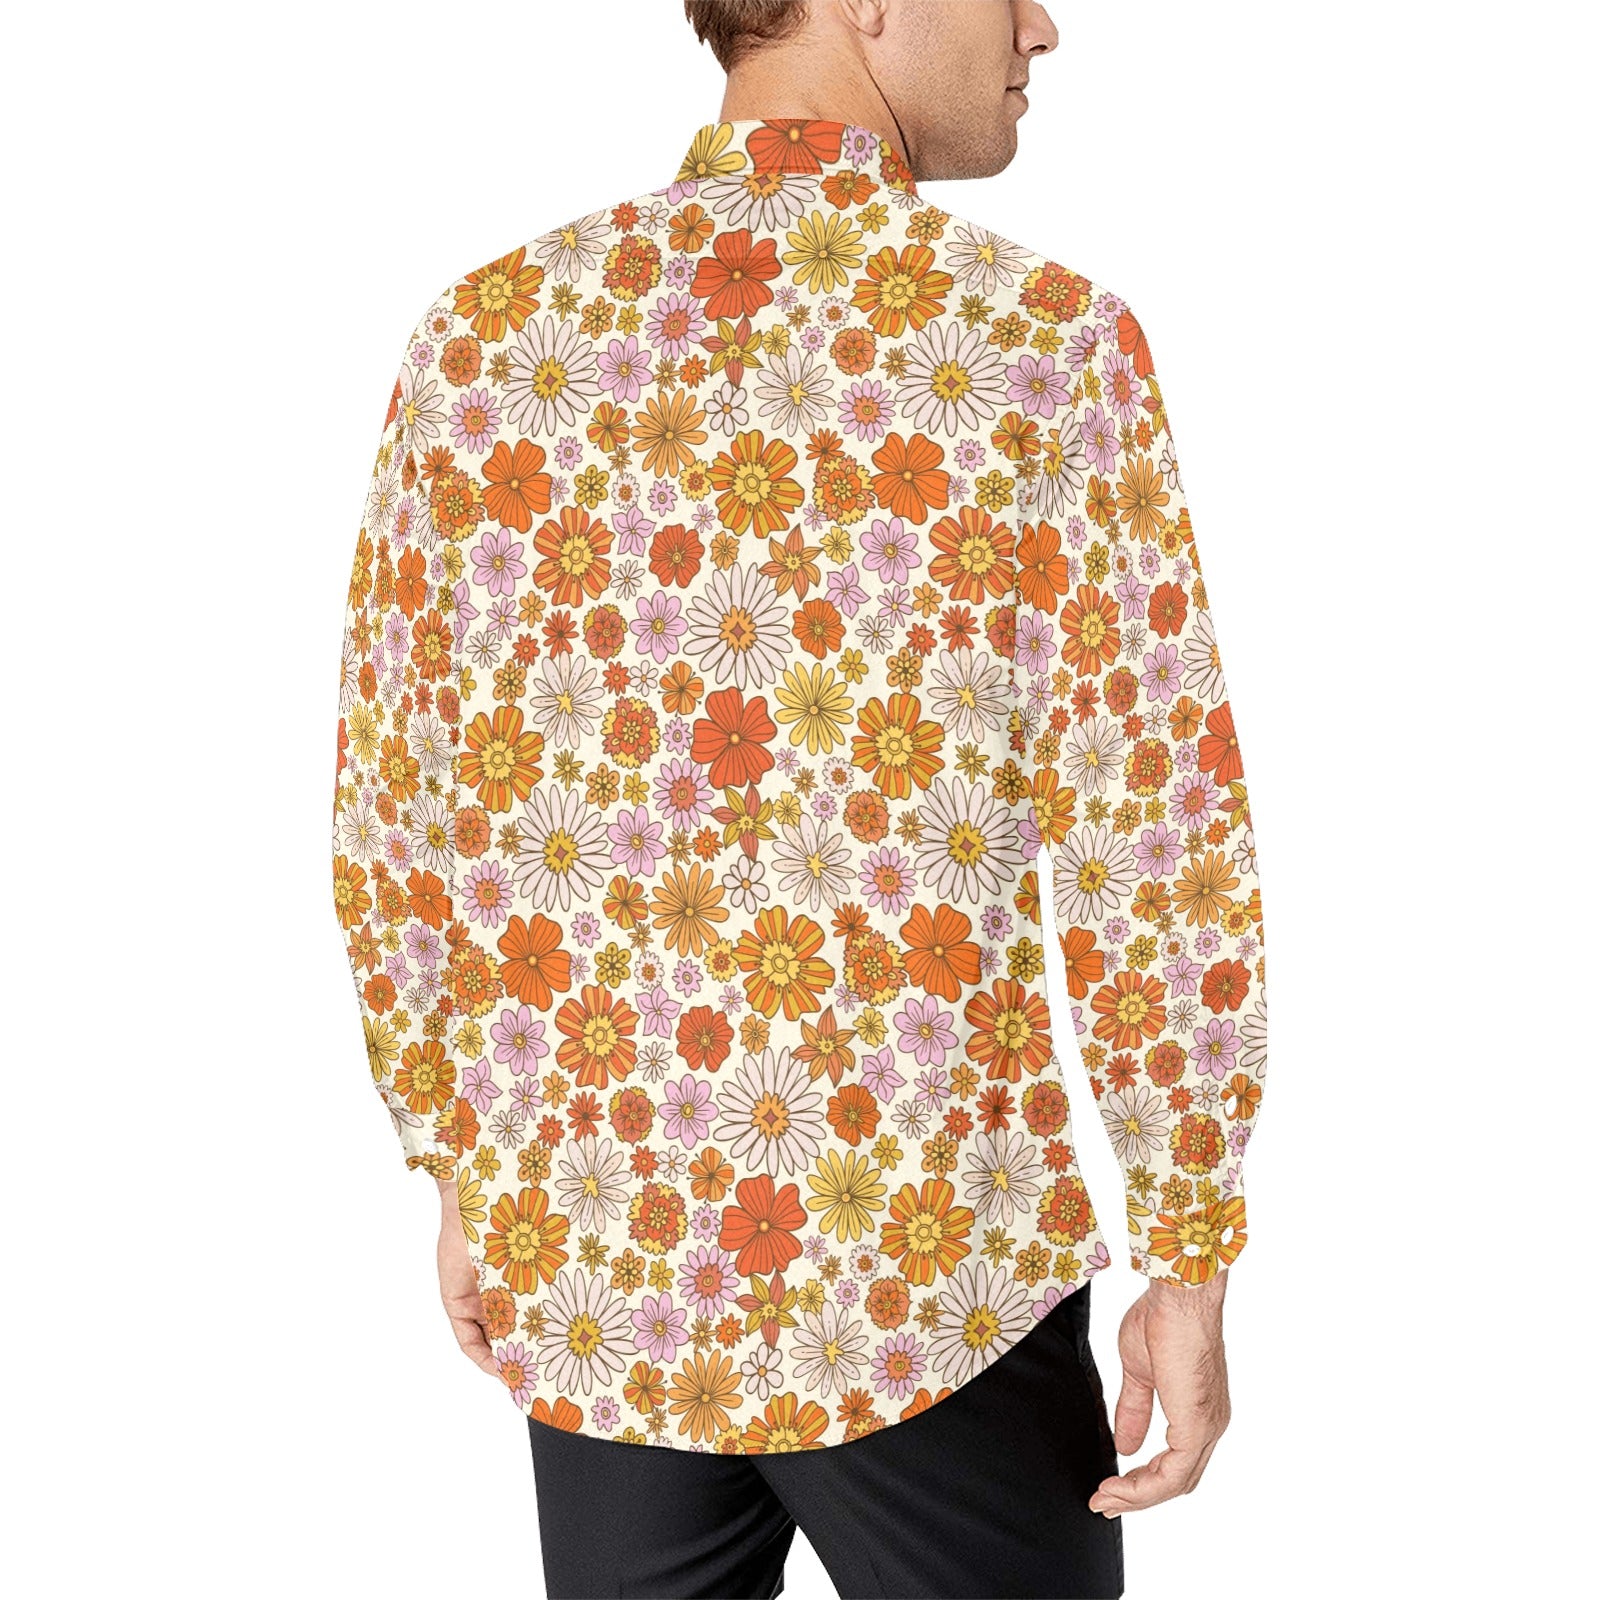 Men's Funky Printed Shirt Casual Shirt Fancy Floral Tops - Cloudstyle